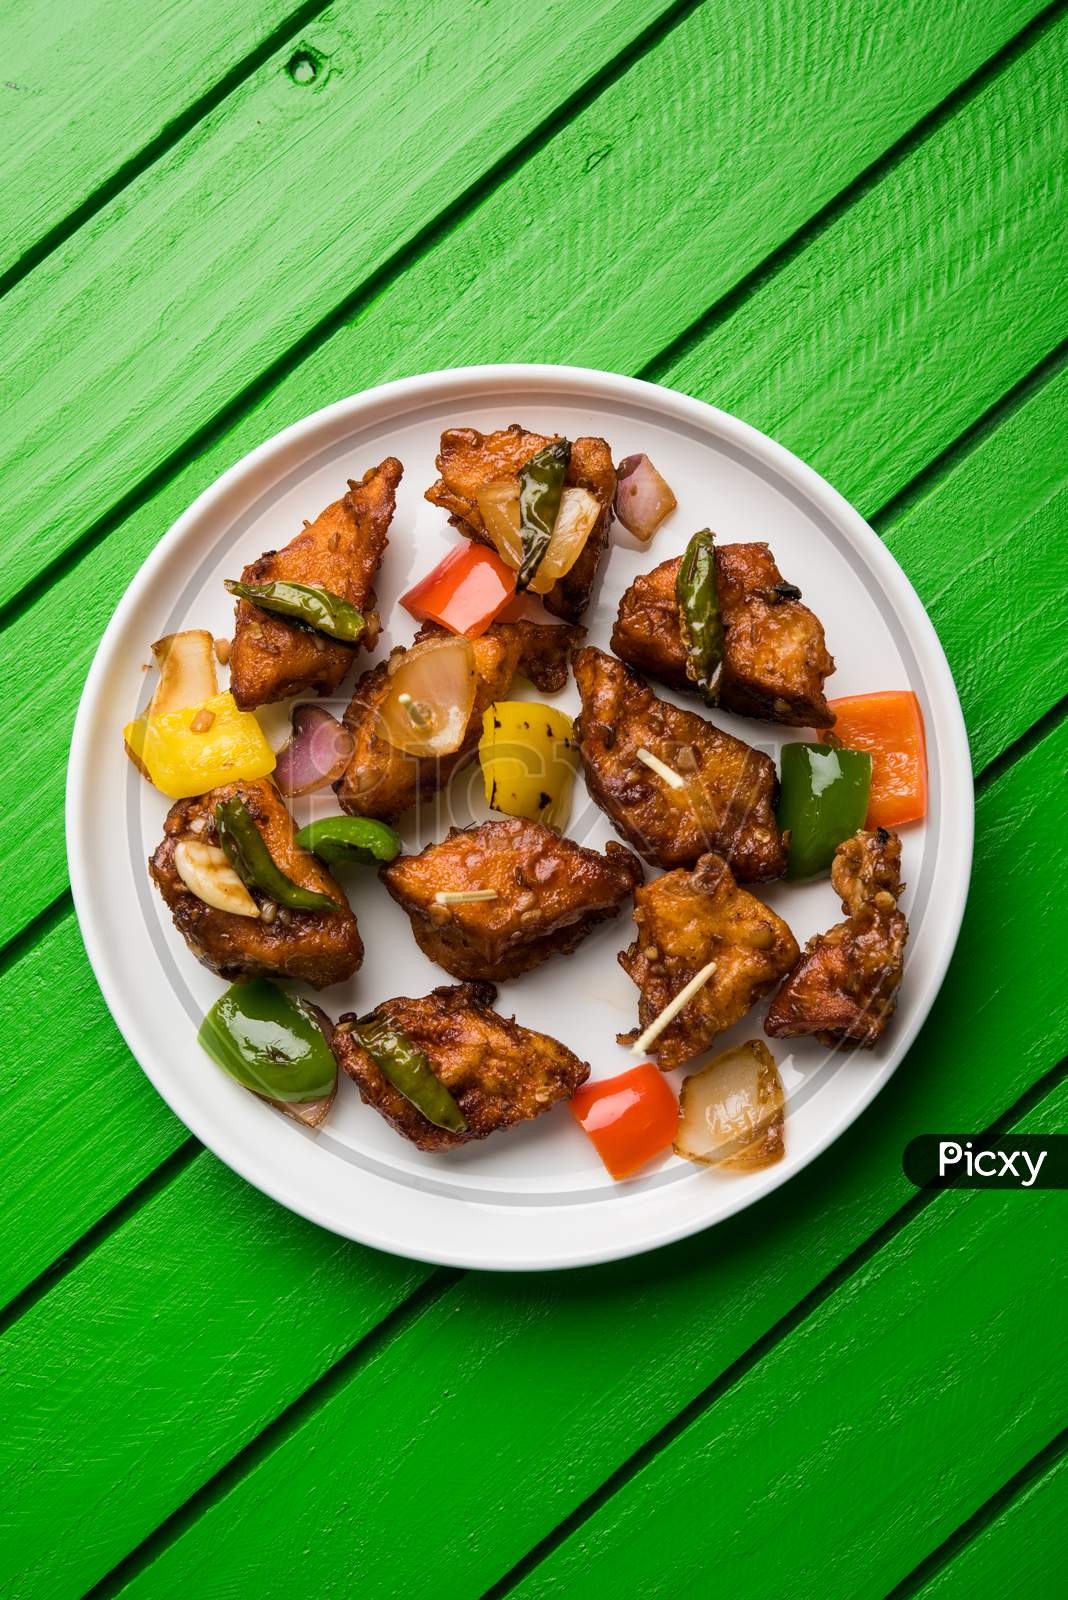 Chilli paneer or Spicy cottage cheese